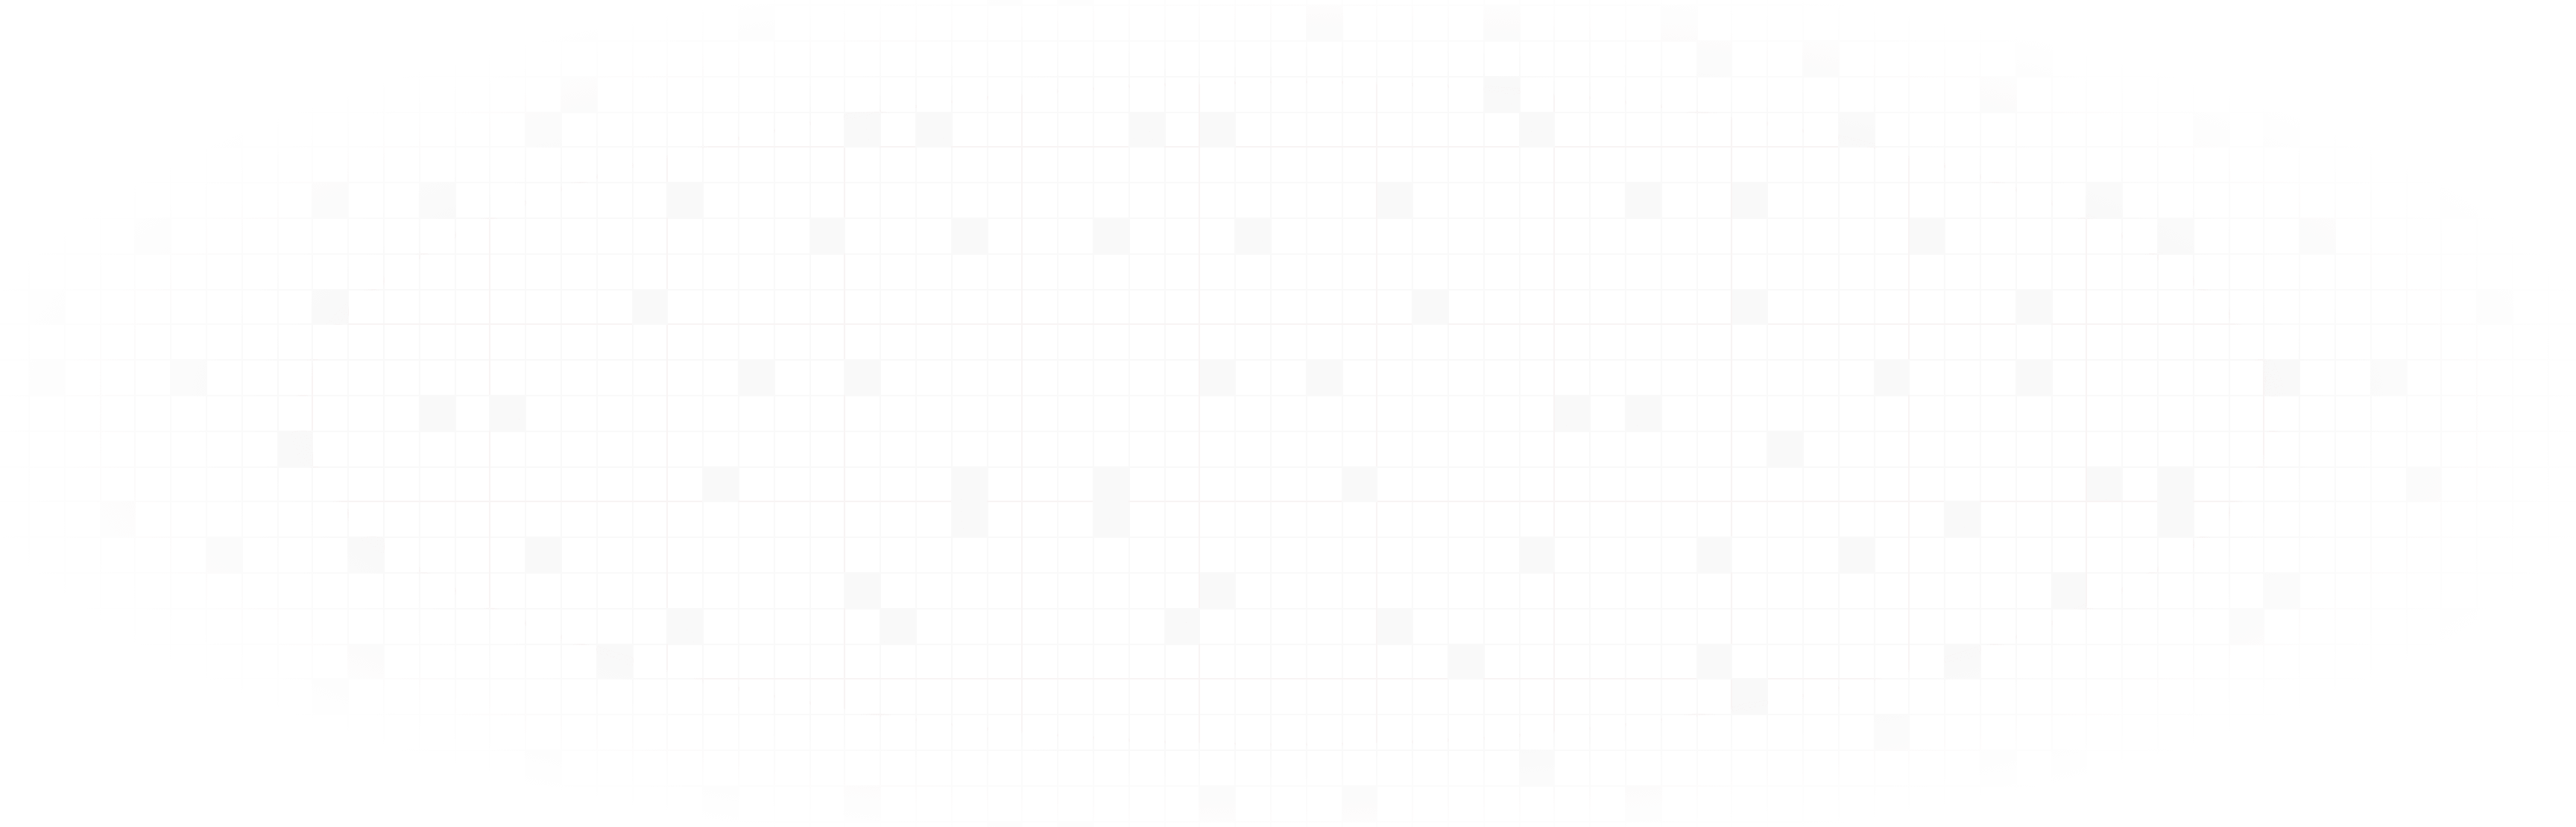 Background image for the section with highlighted squares